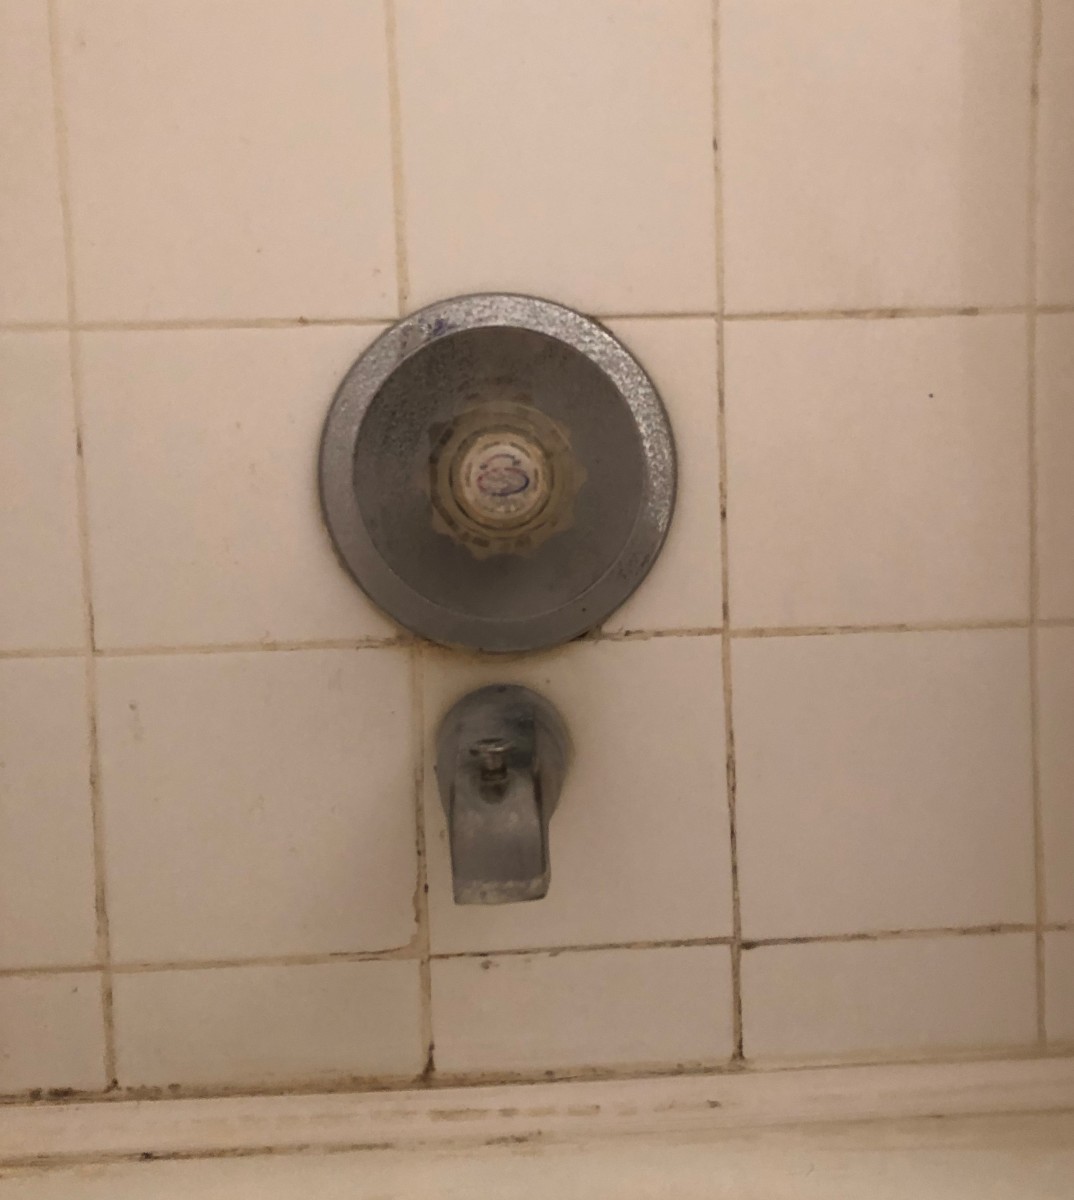 How to Replace a Single-Handle Shower Valve